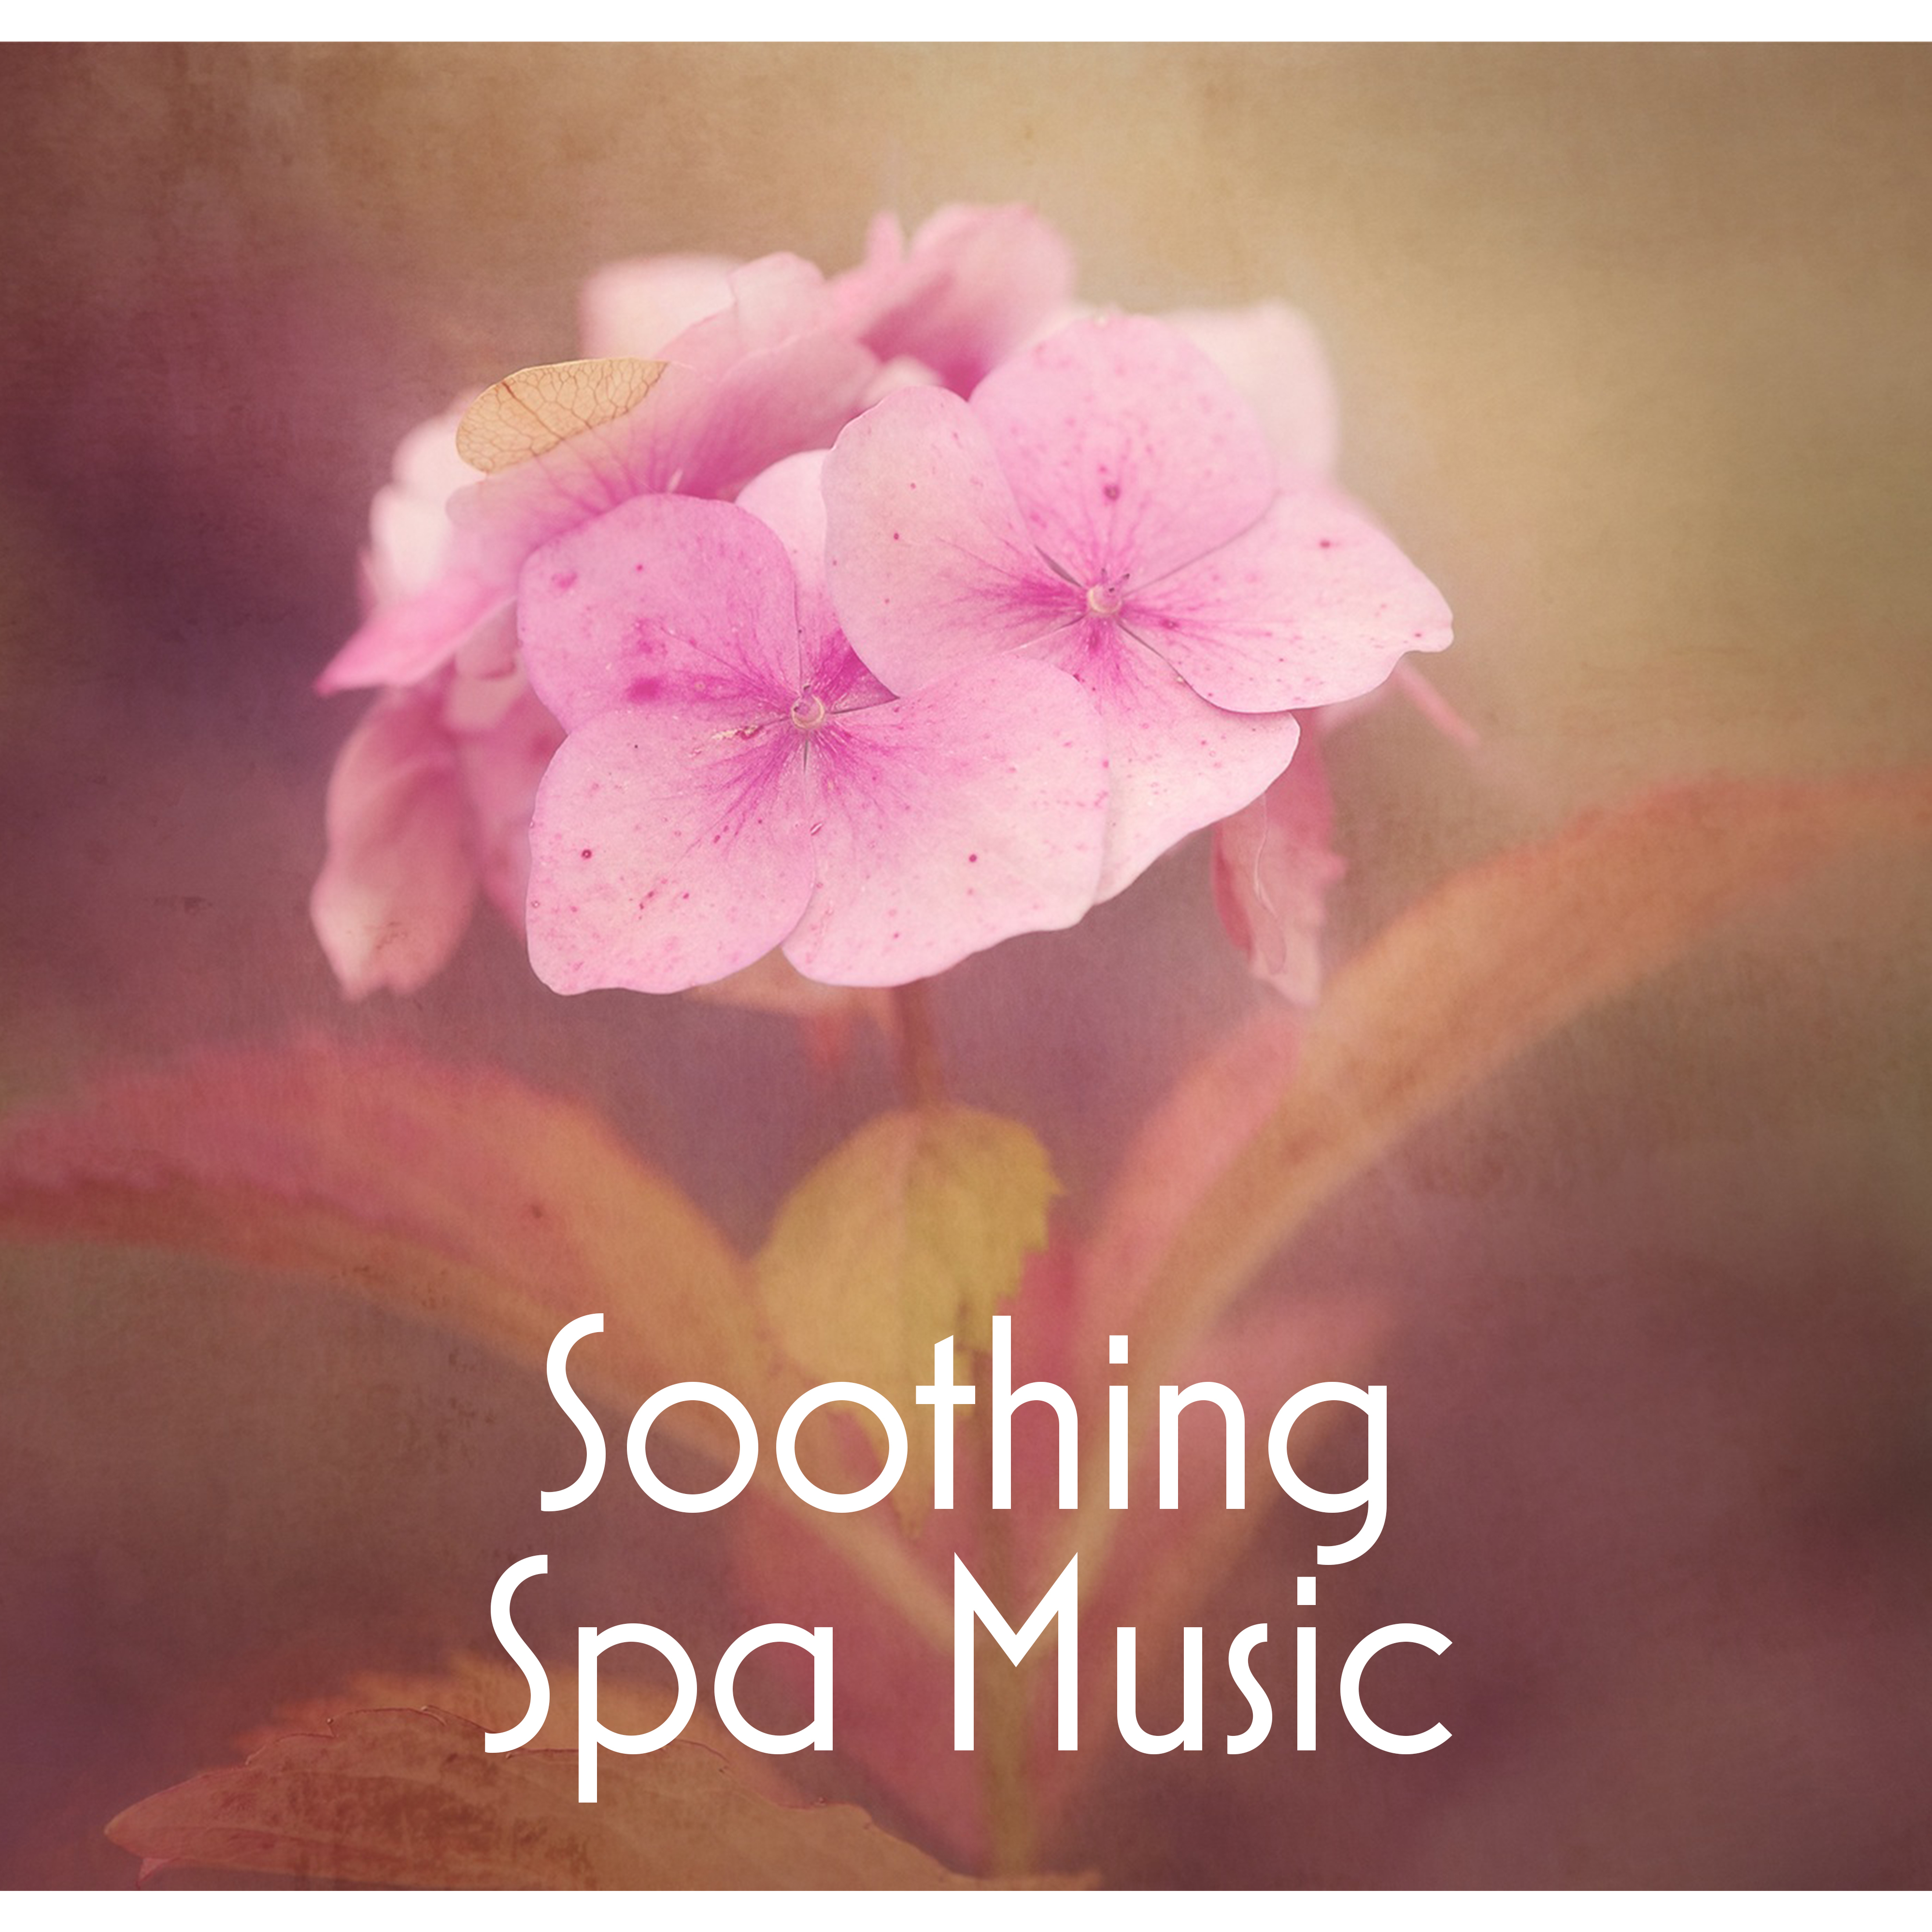 Soothing Spa Music – Nature Sounds for Spa, Massage, Music for Wellness Hotel, Instrumental Songs for Pure Relaxation